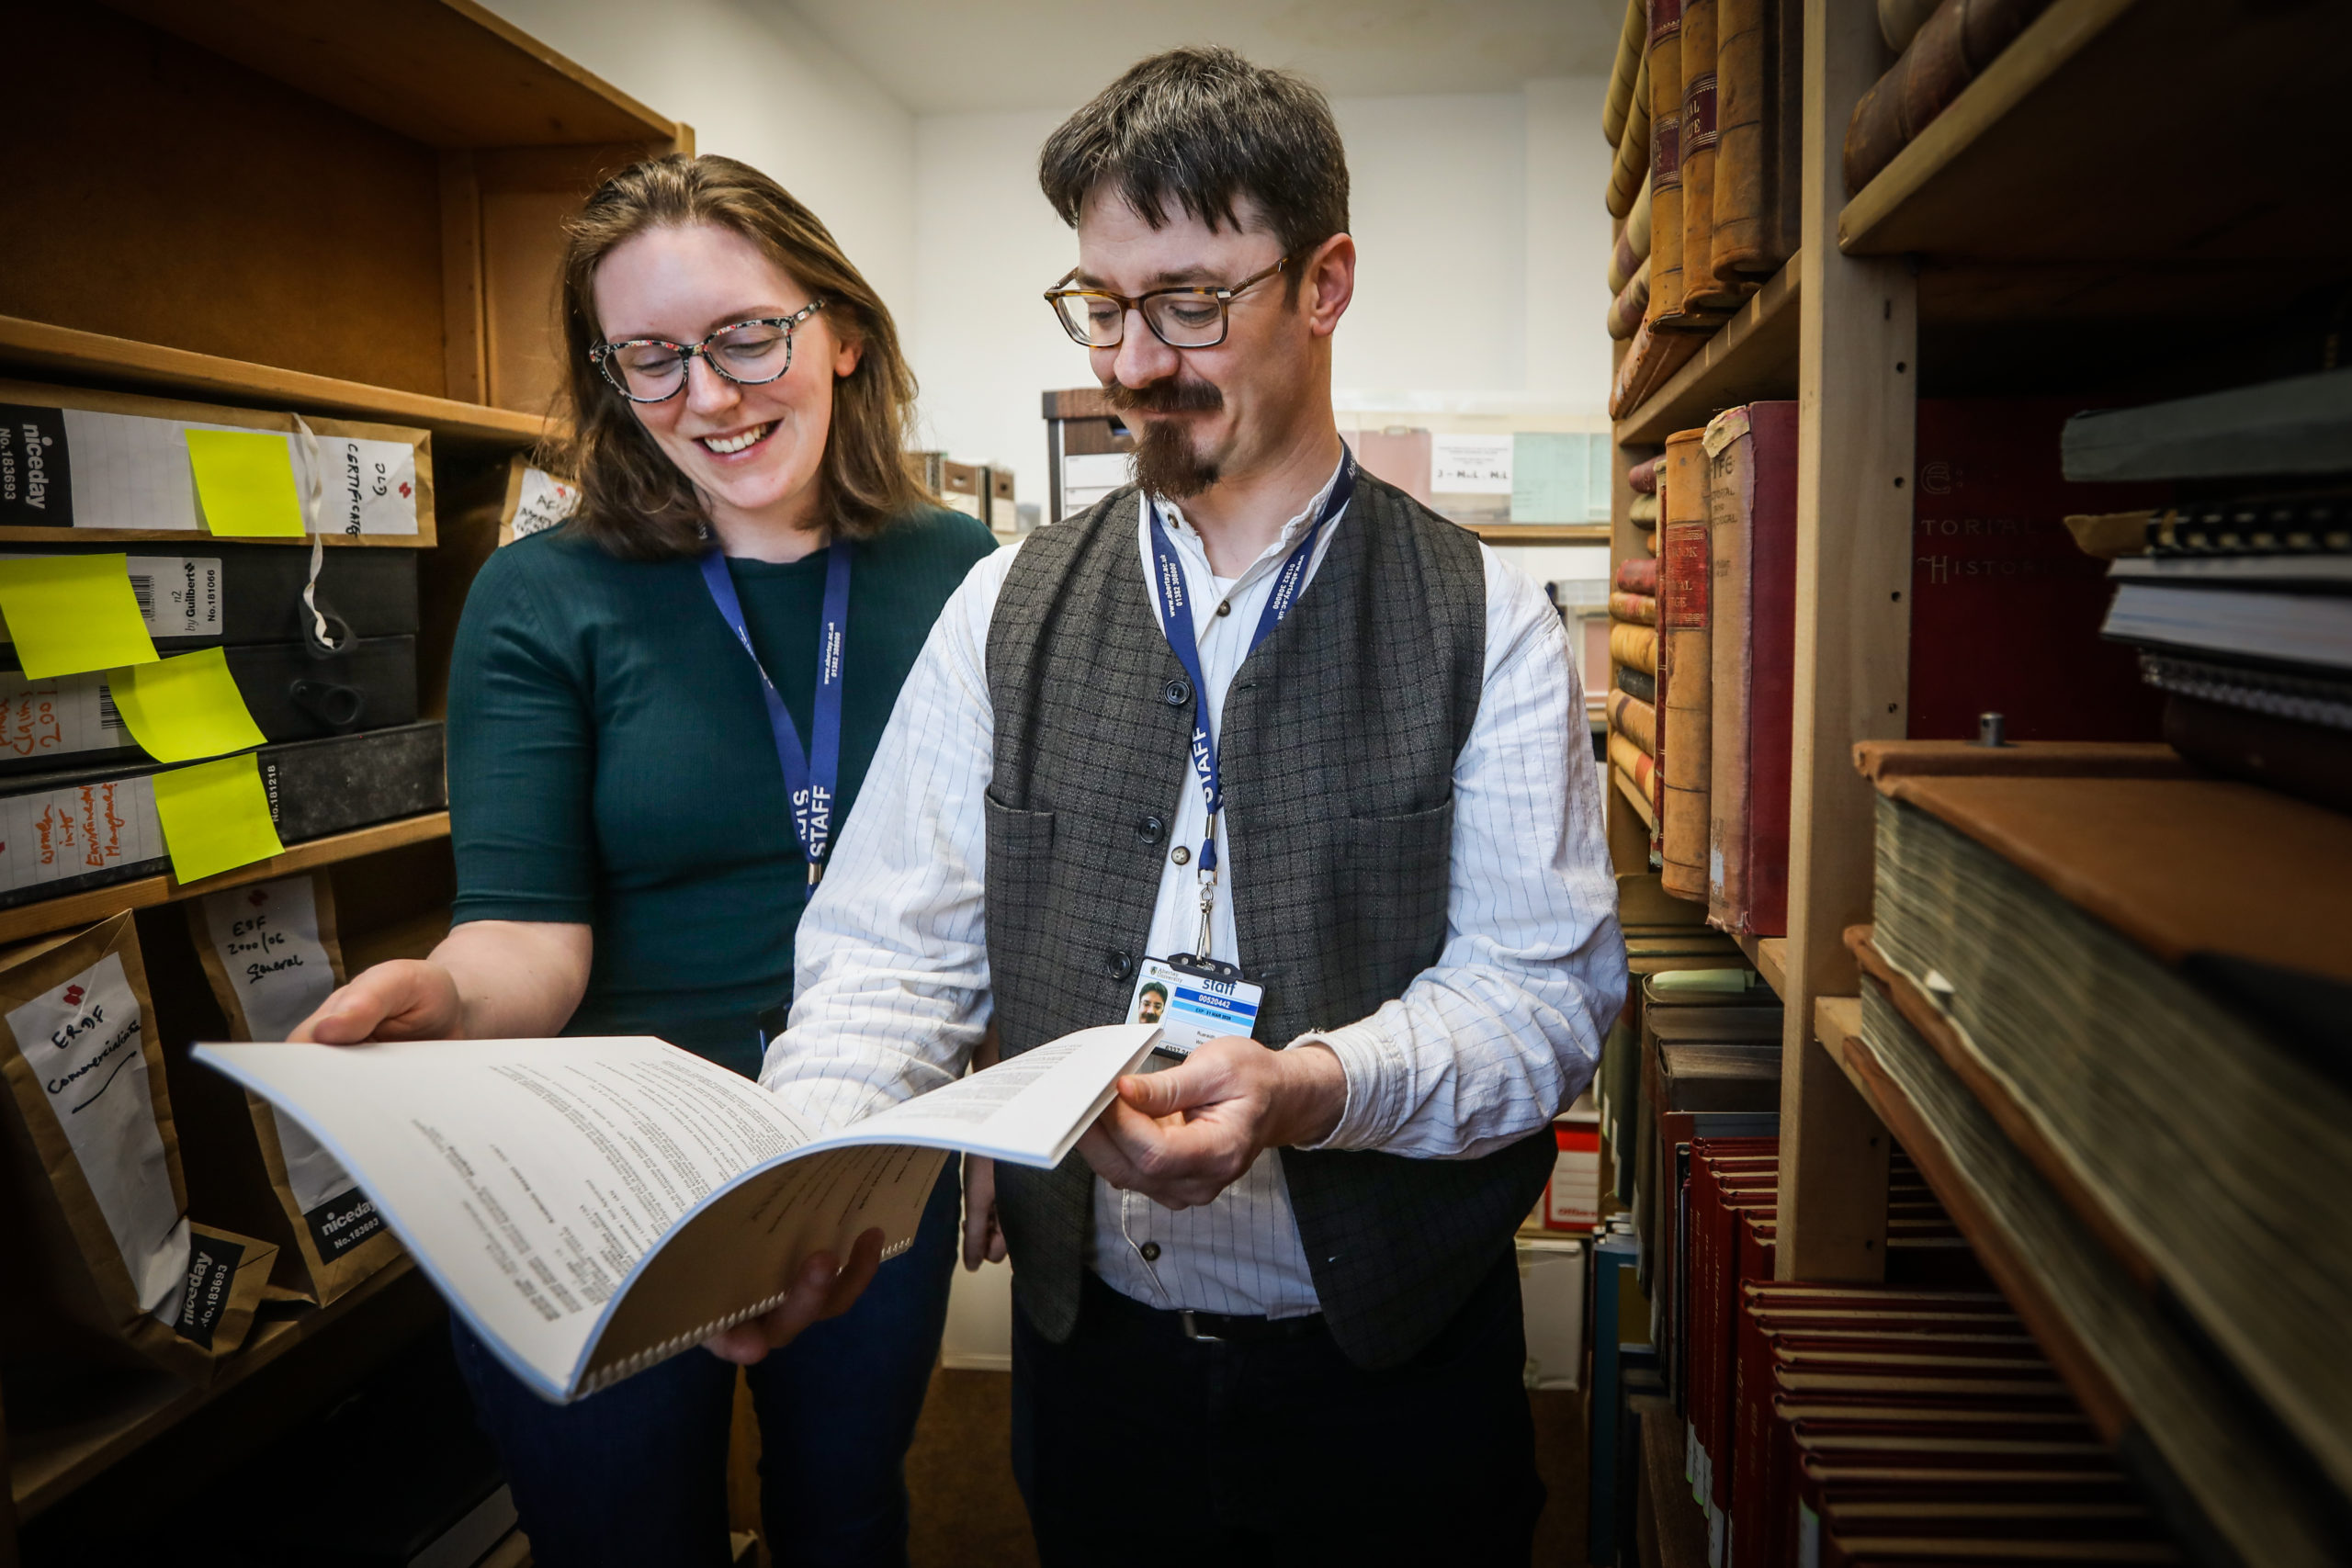 Public Engagement Officer Hope Busàk with archivist Ruaraidh Wishart in the archive room with the Ethnical Hacking workbook.